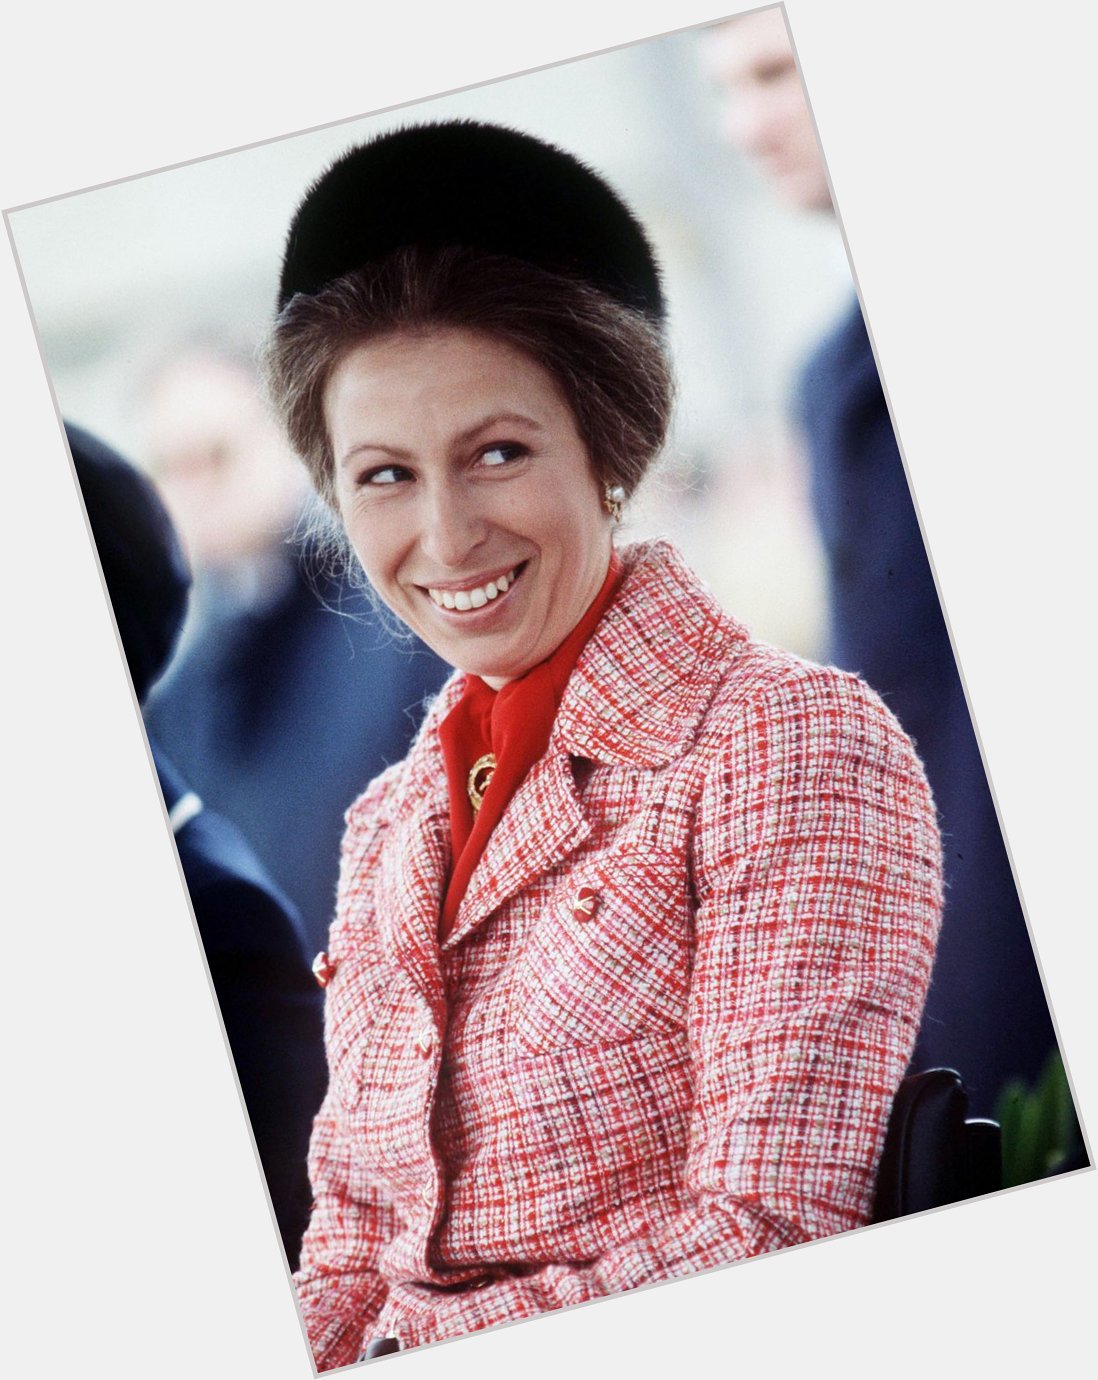 Happy birthday to Princess Anne, who turns 69 today! How do you think she\s spending her day? 